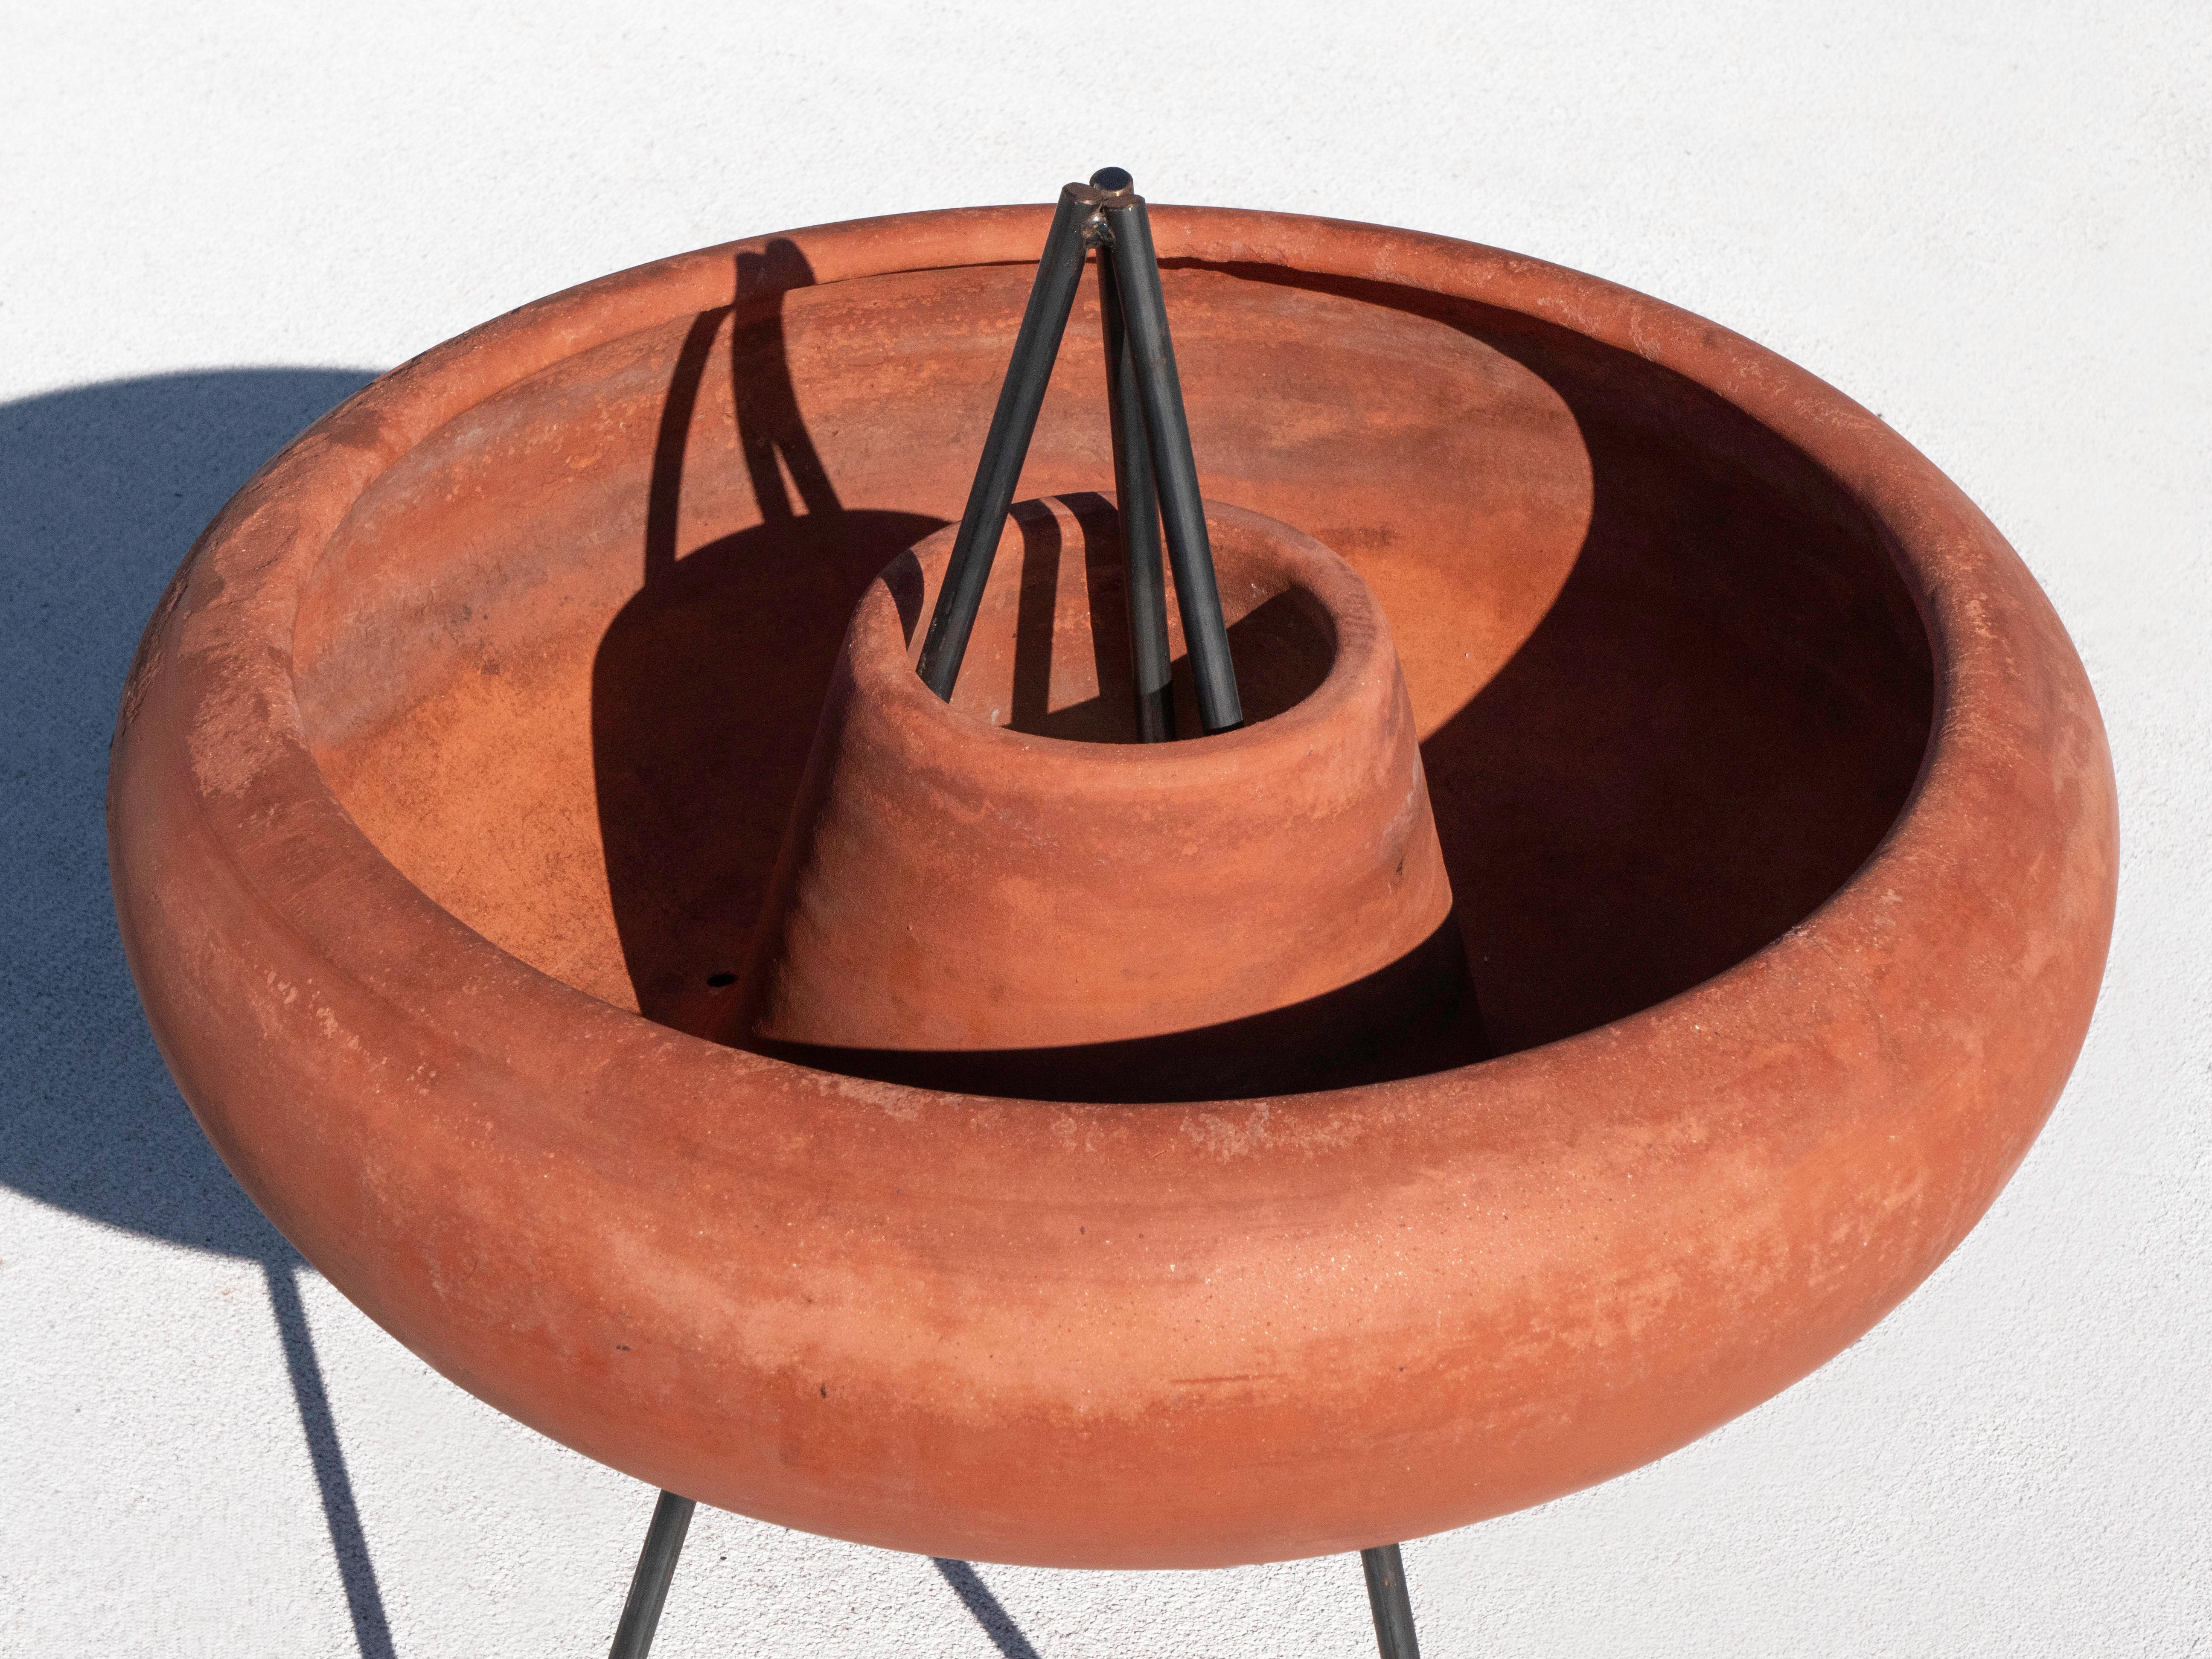 John Follis & Rex Goode Sombrero Planter for Architectural Pottery, circa 1950's.  Very rare unglazed terracotta.  The AP catalog shows this piece as Model M-109.  

We have 2 of these available, see other listings.  This is sombrero  1 of 2.  

In